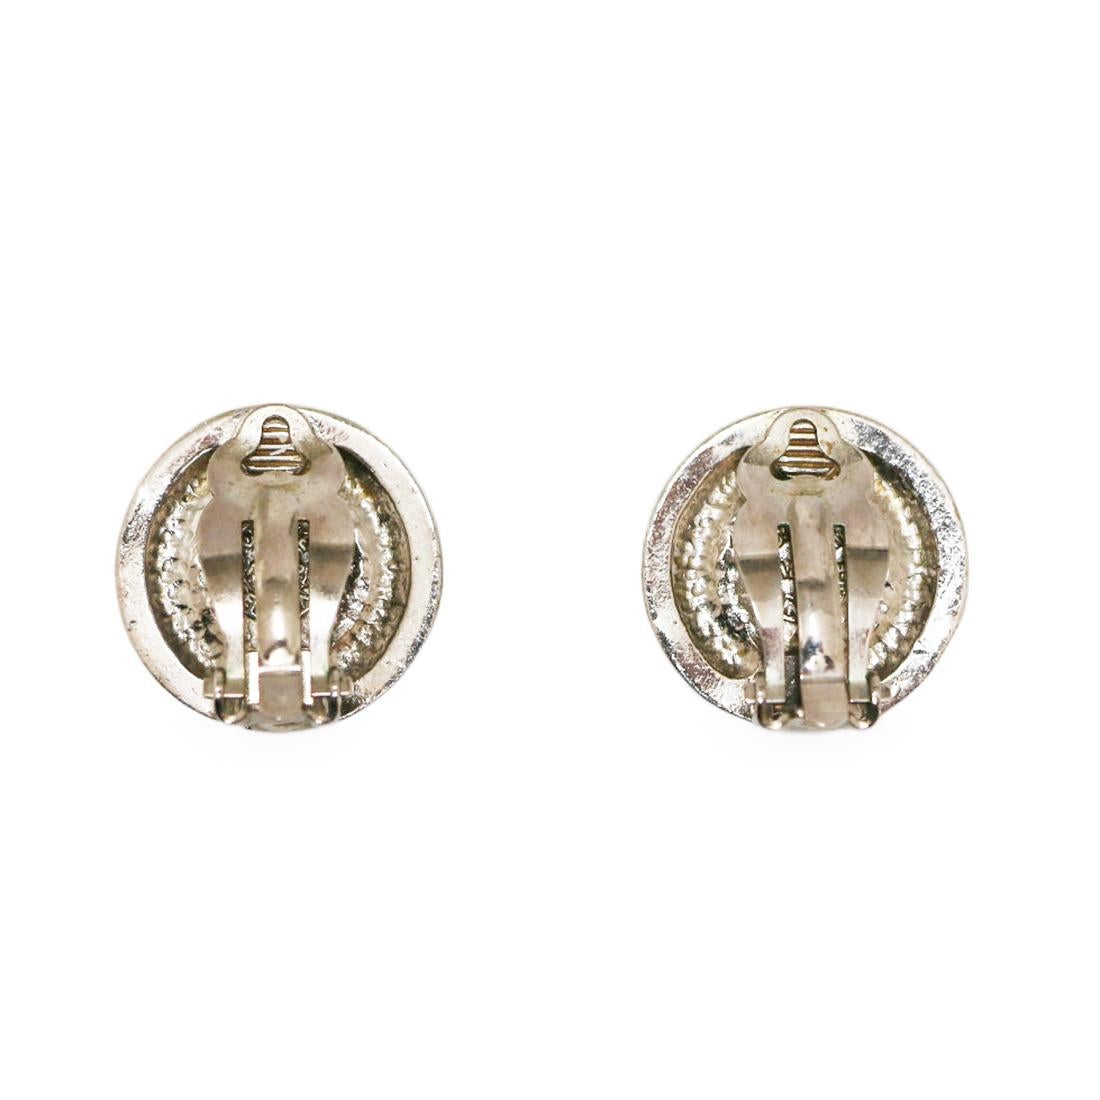 Wonderful vintage clip-on earrings from Celine

Condition: excellent
Made in France
Materials: metal, pearls, pale yellow crystals
Colors: black, silver
Dimensions: diameter 2 cm
Hardware: silver metal
Stamp: yes
No missing crystal, black pearl,